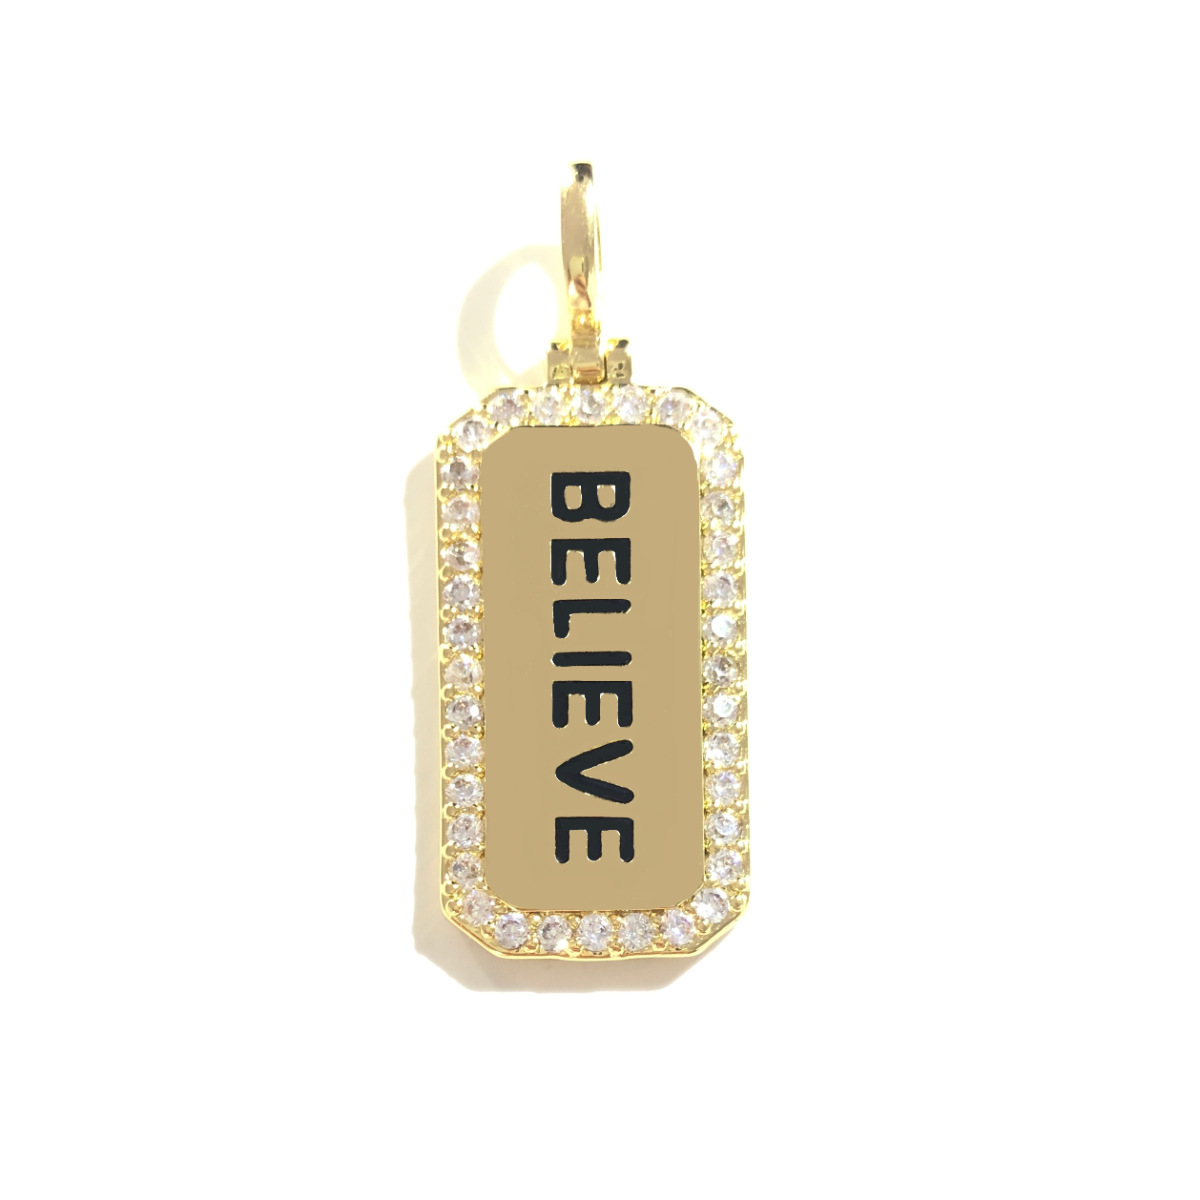 10pcs/lot 38*15mm CZ Paved Believe Word Tags Charms Pendants Gold CZ Paved Charms Christian Quotes New Charms Arrivals Word Tags Charms Beads Beyond